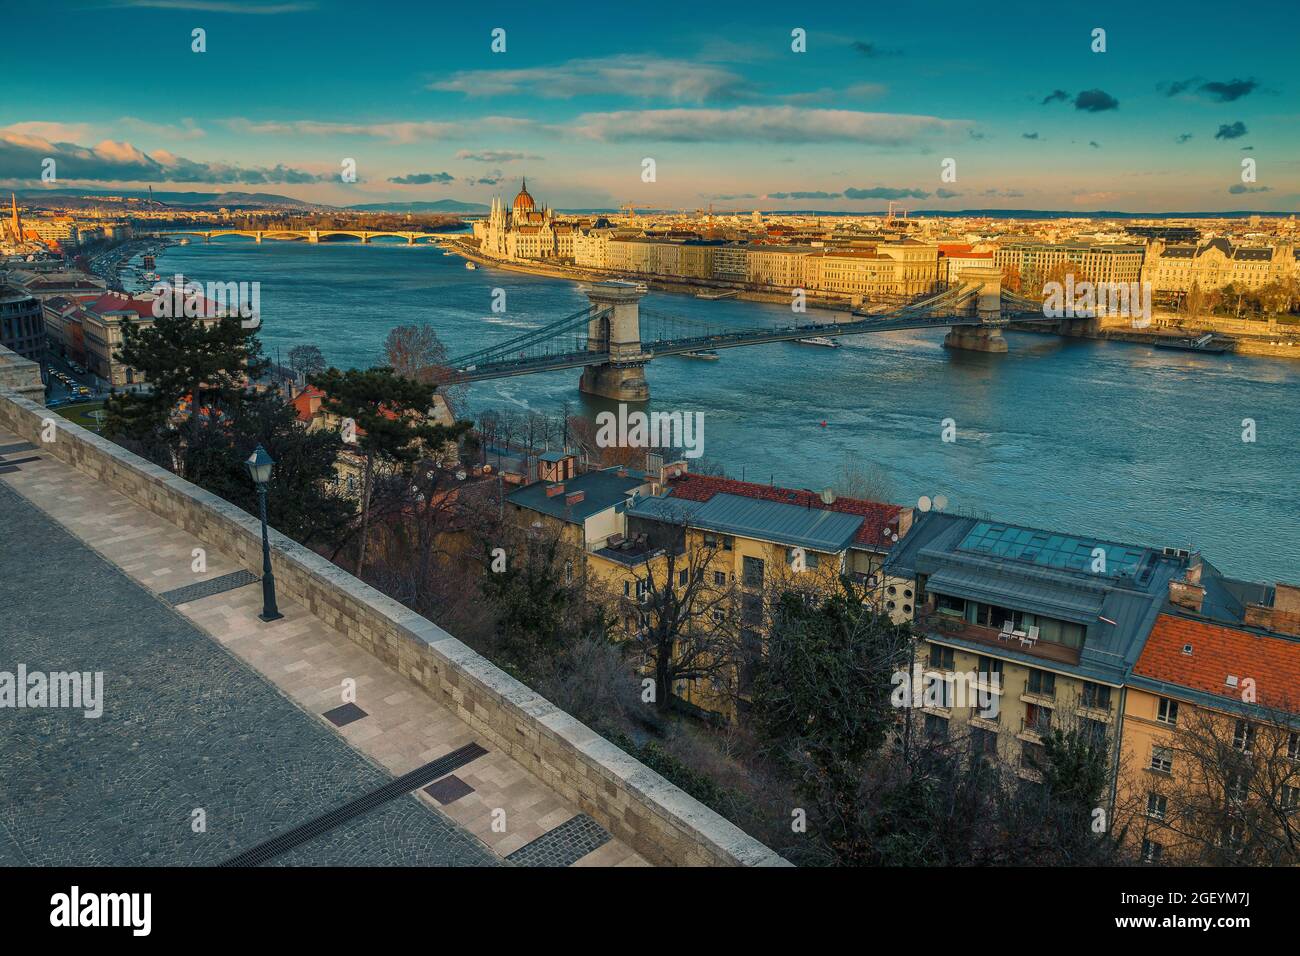 Stunning panoramic view from the Buda castle with Chain bridge over the Danube river and amazing shoreline, Budapest, Hungary, Europe Stock Photo